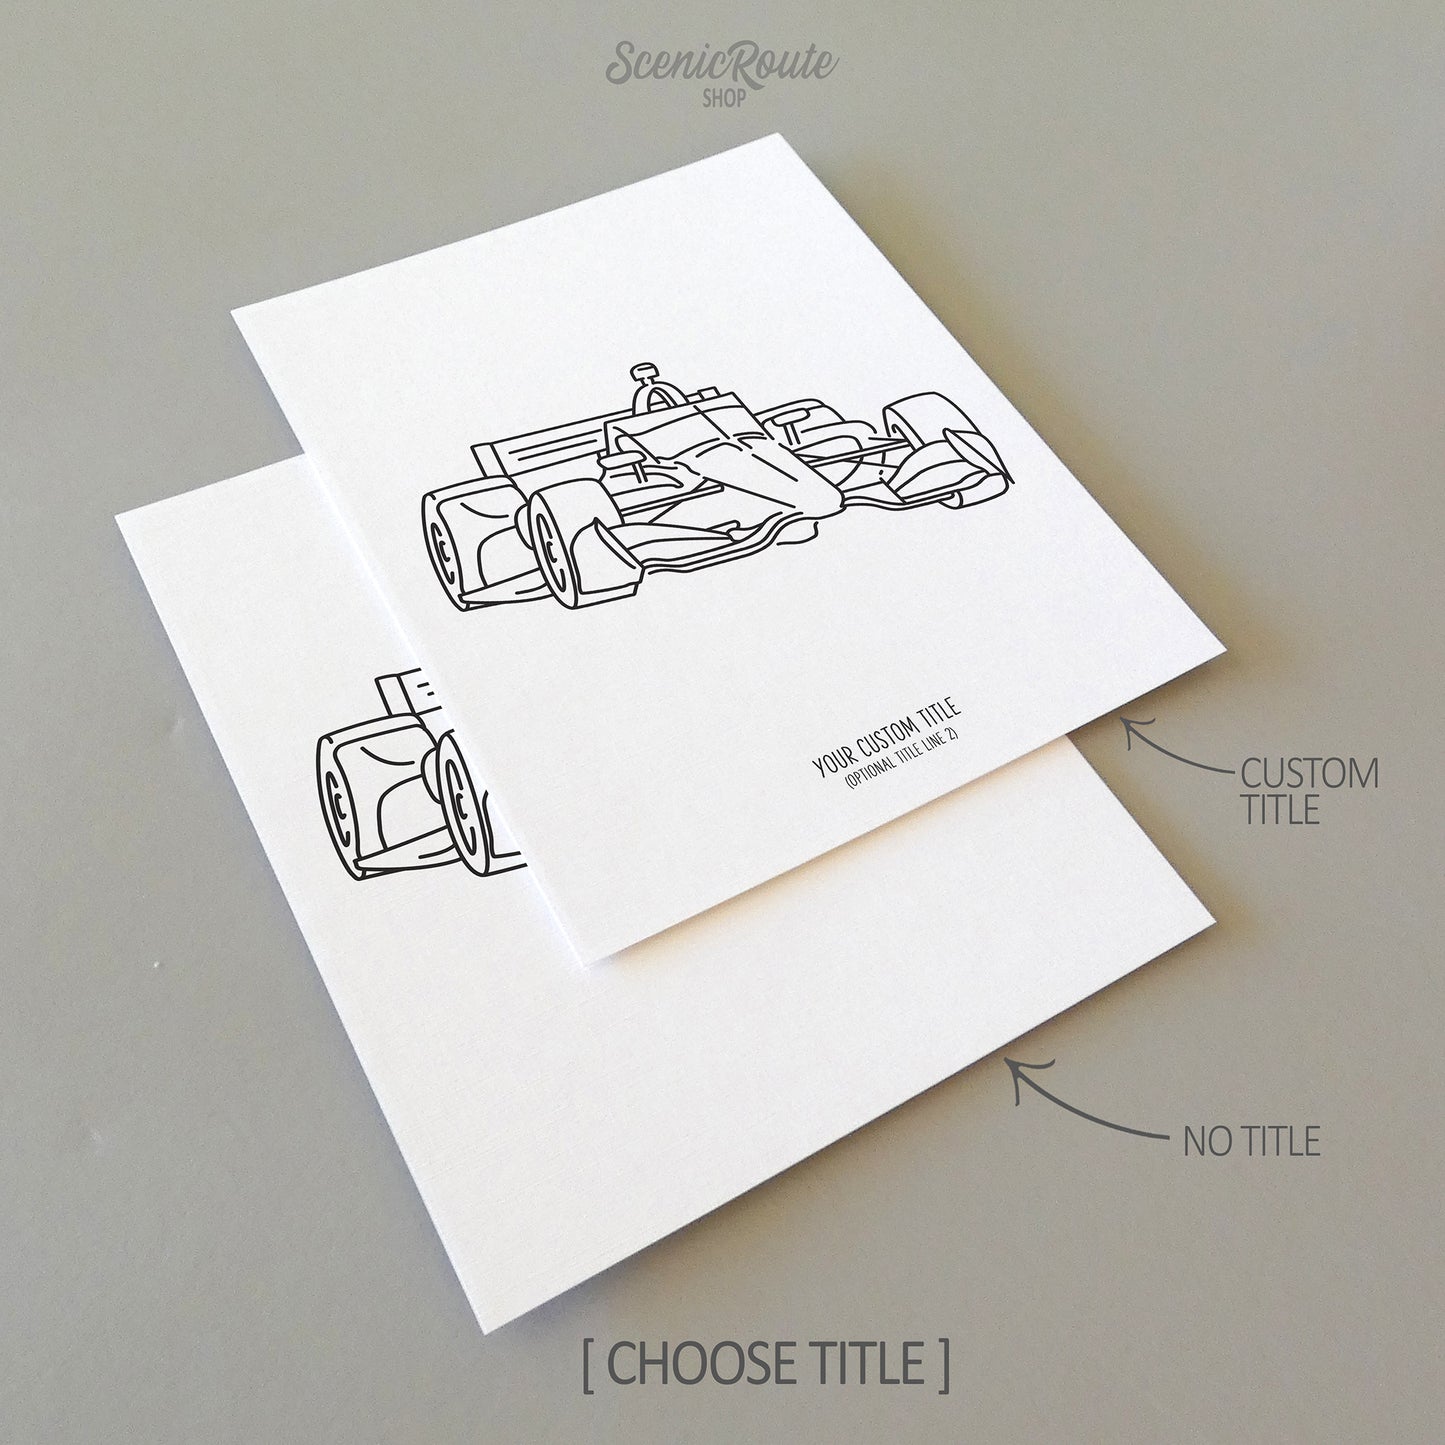 Two line art drawings of an Indy Car on white linen paper with a gray background.  The pieces are shown with “No Title” and “Custom Title” options for the available art print options.